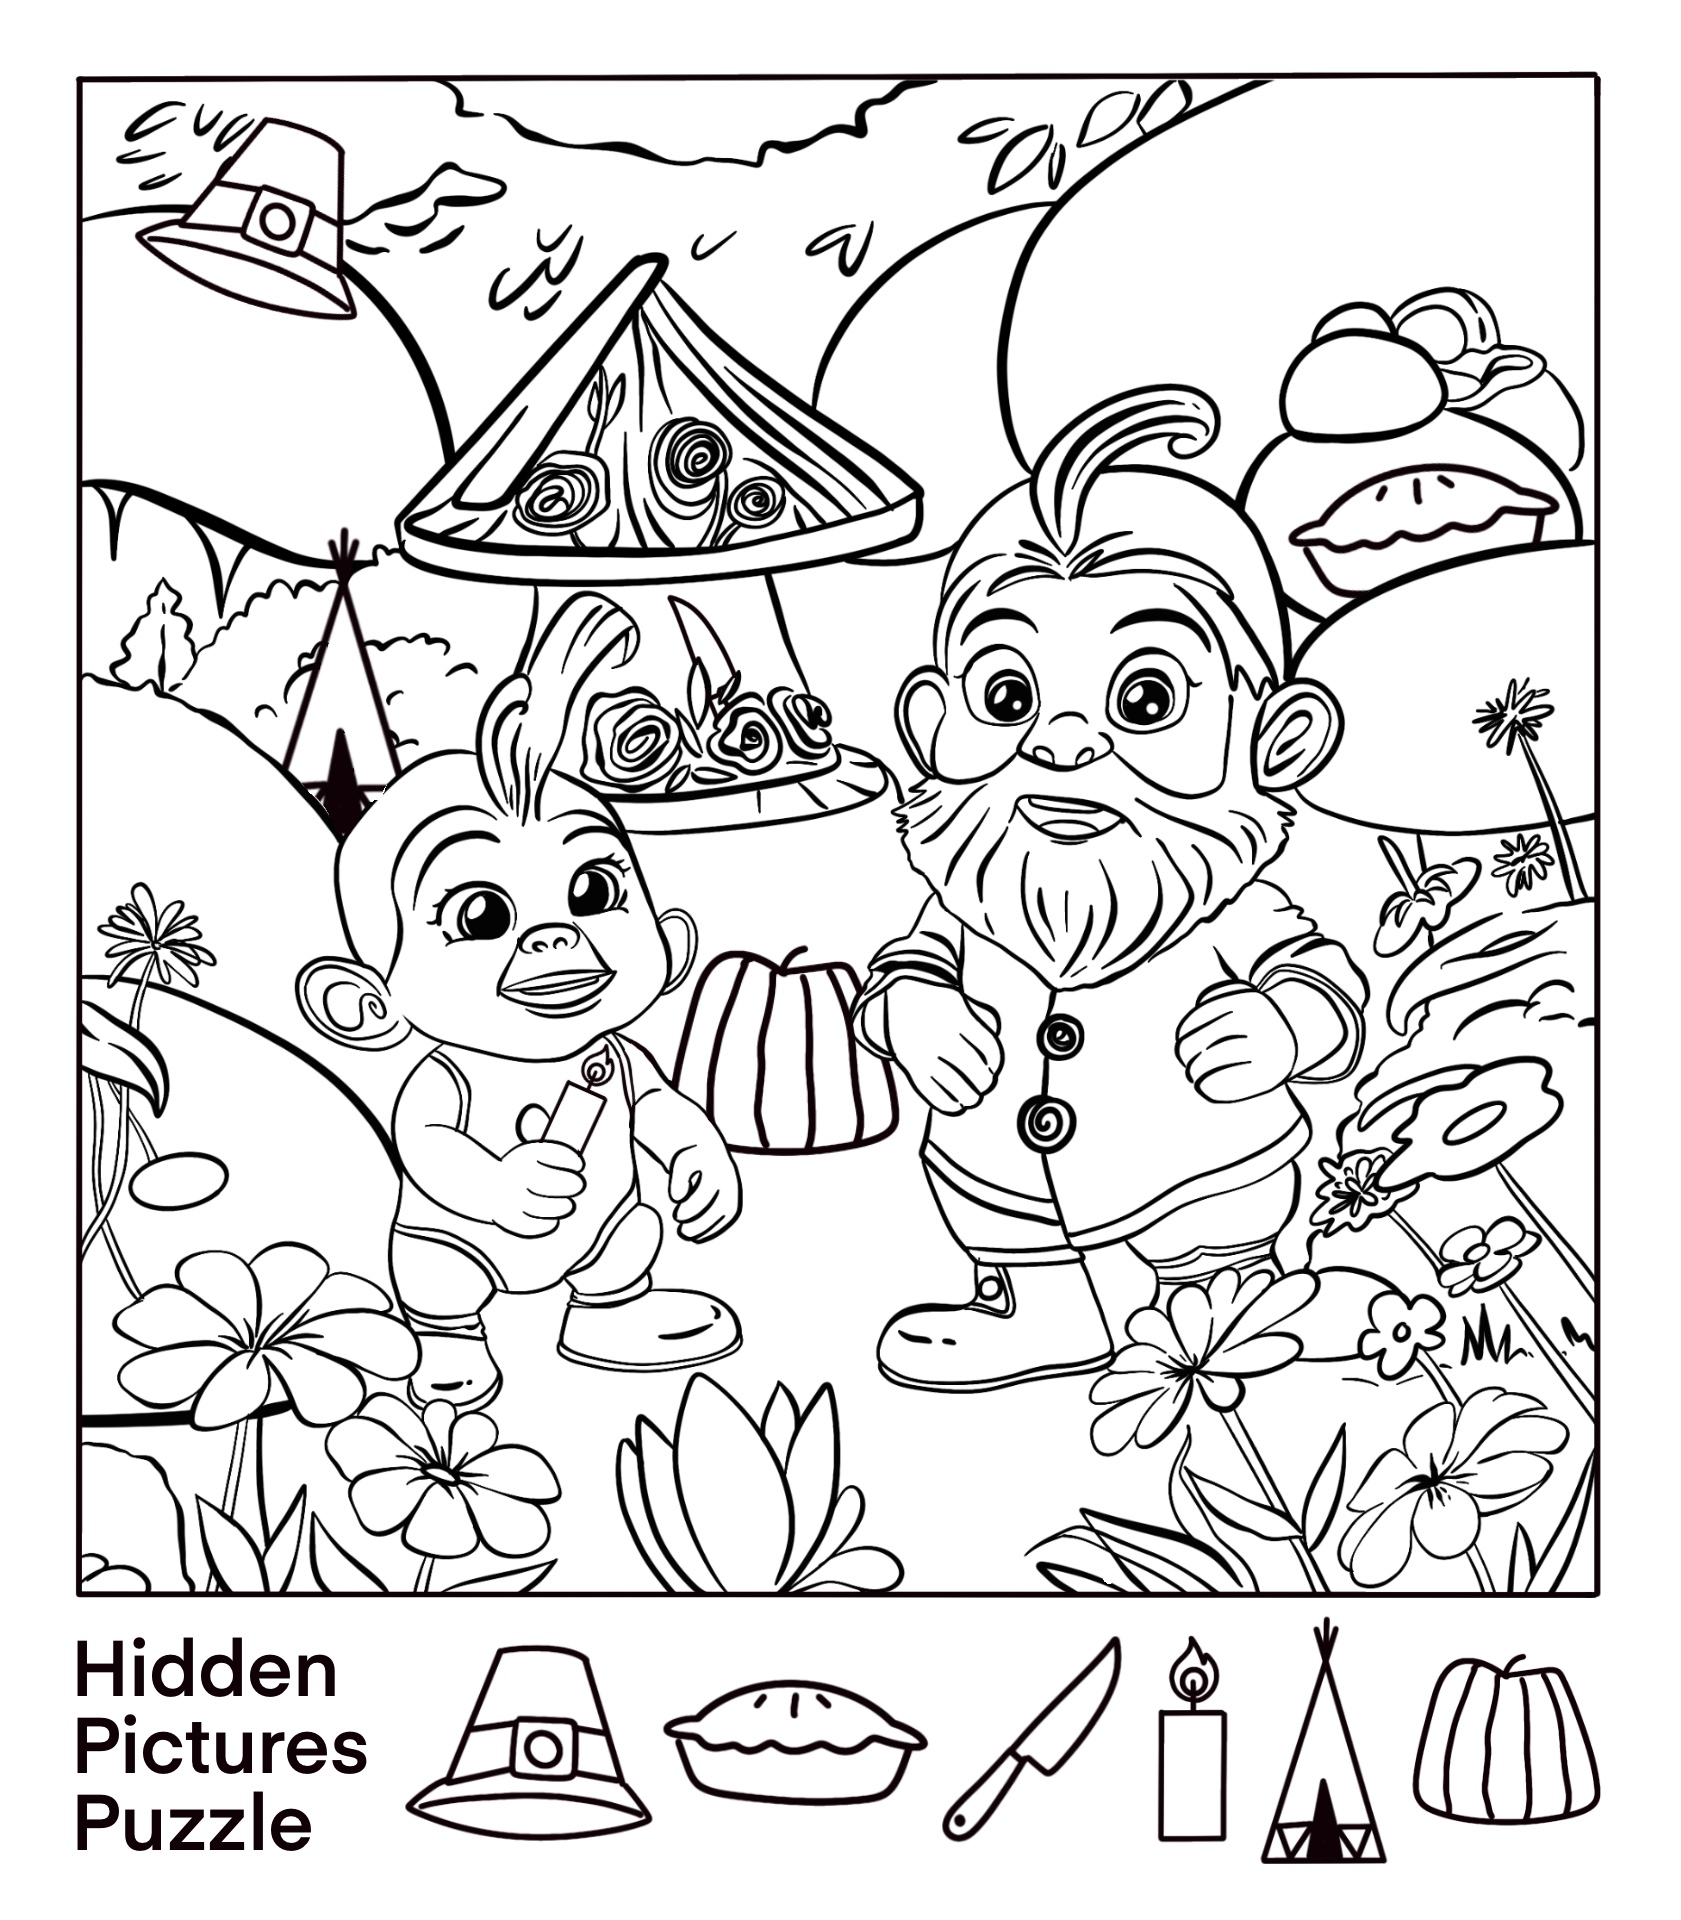 5-best-images-of-fall-hidden-object-puzzles-printable-free-printable-hidden-pictures-for-kids